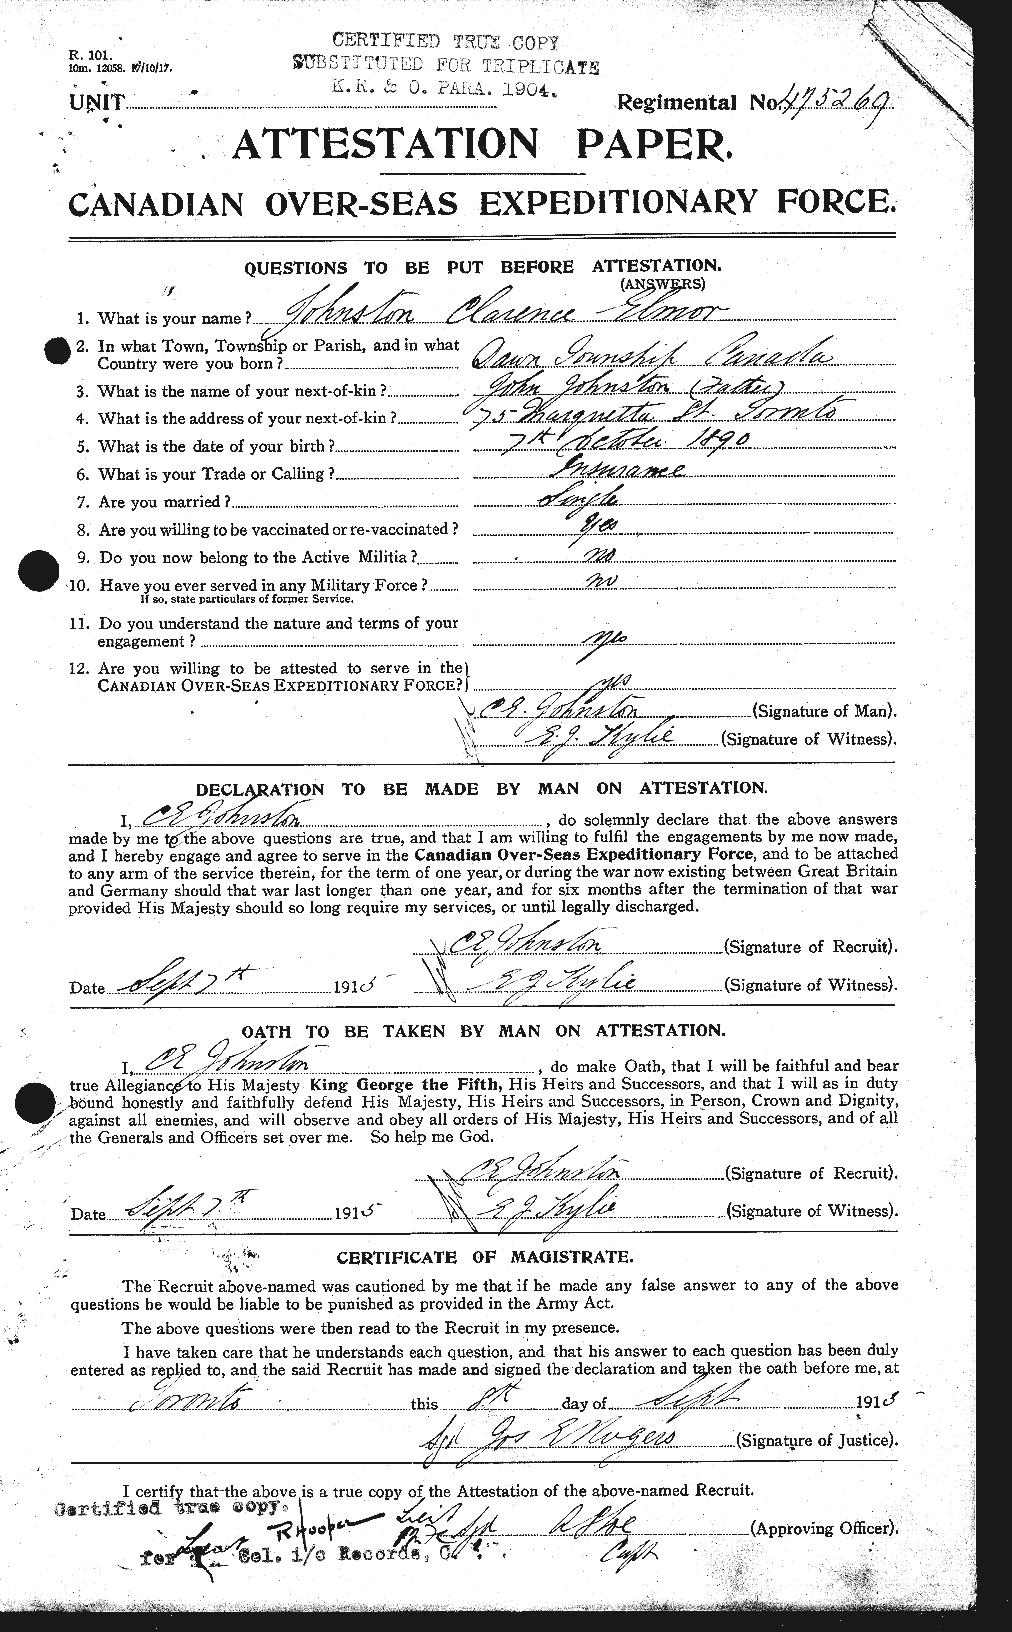 Personnel Records of the First World War - CEF 423132a